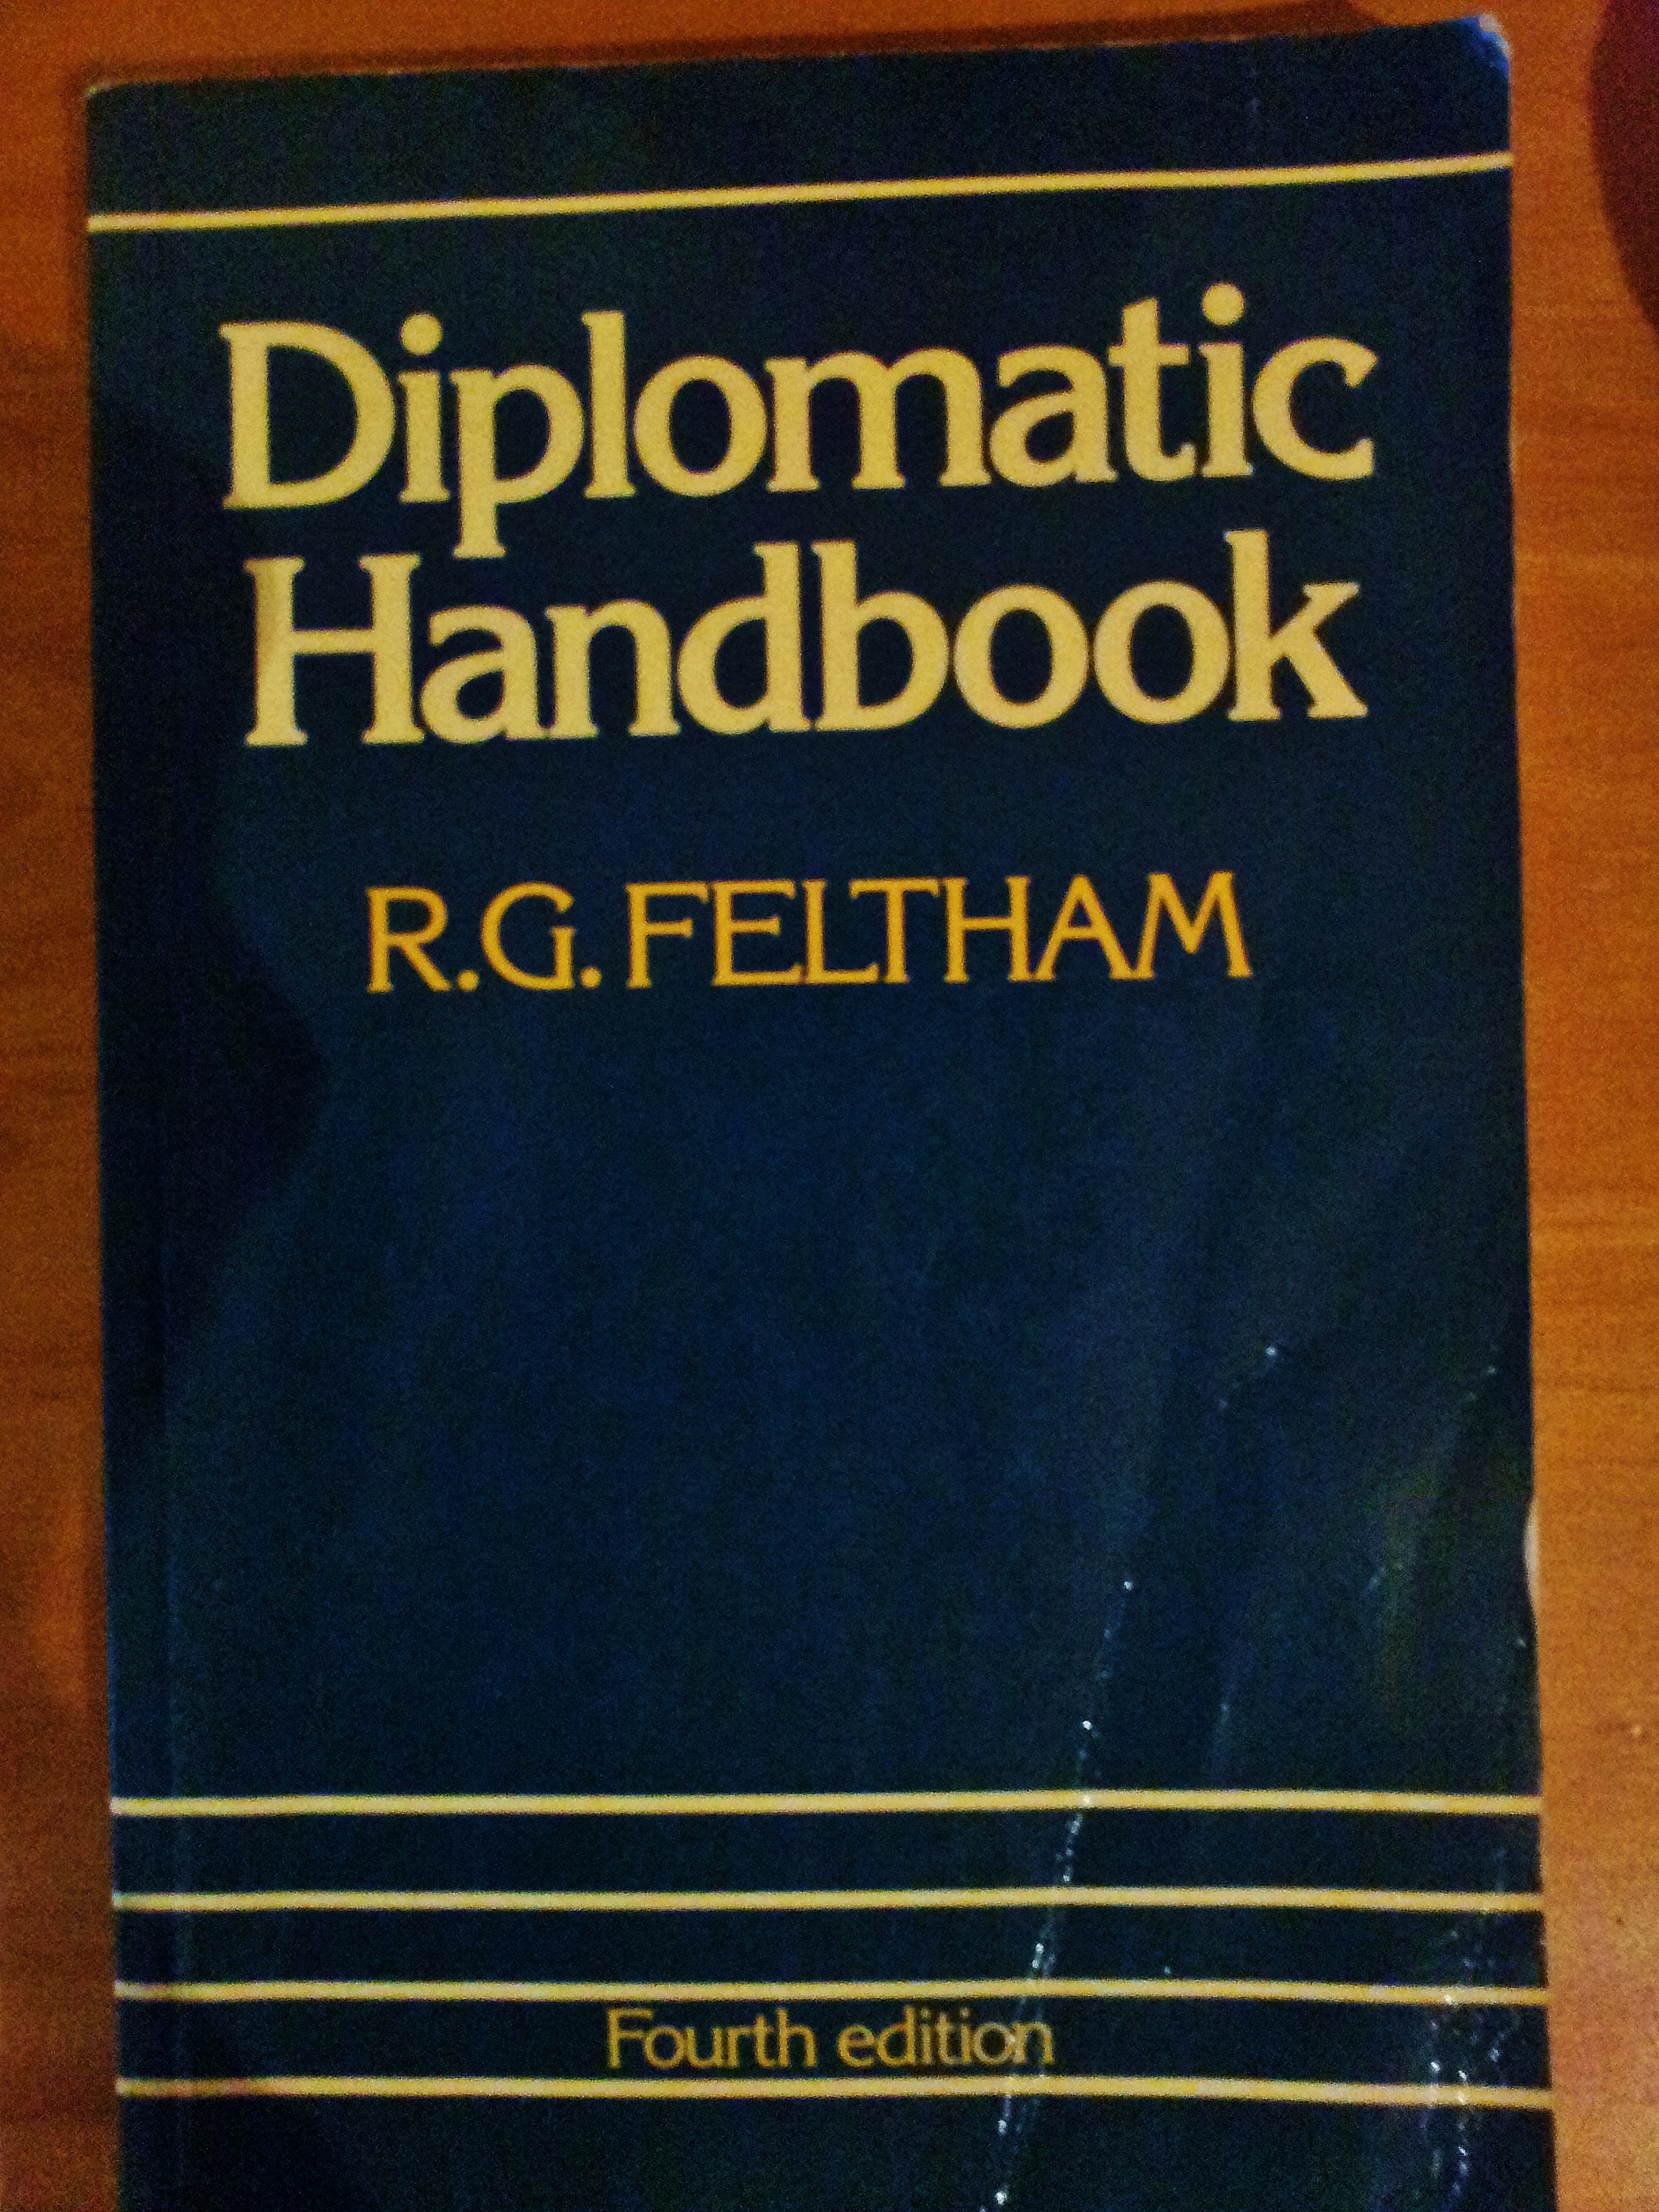 There are no guides or handbooks on how to adapt to a diplomatic lifestyle.